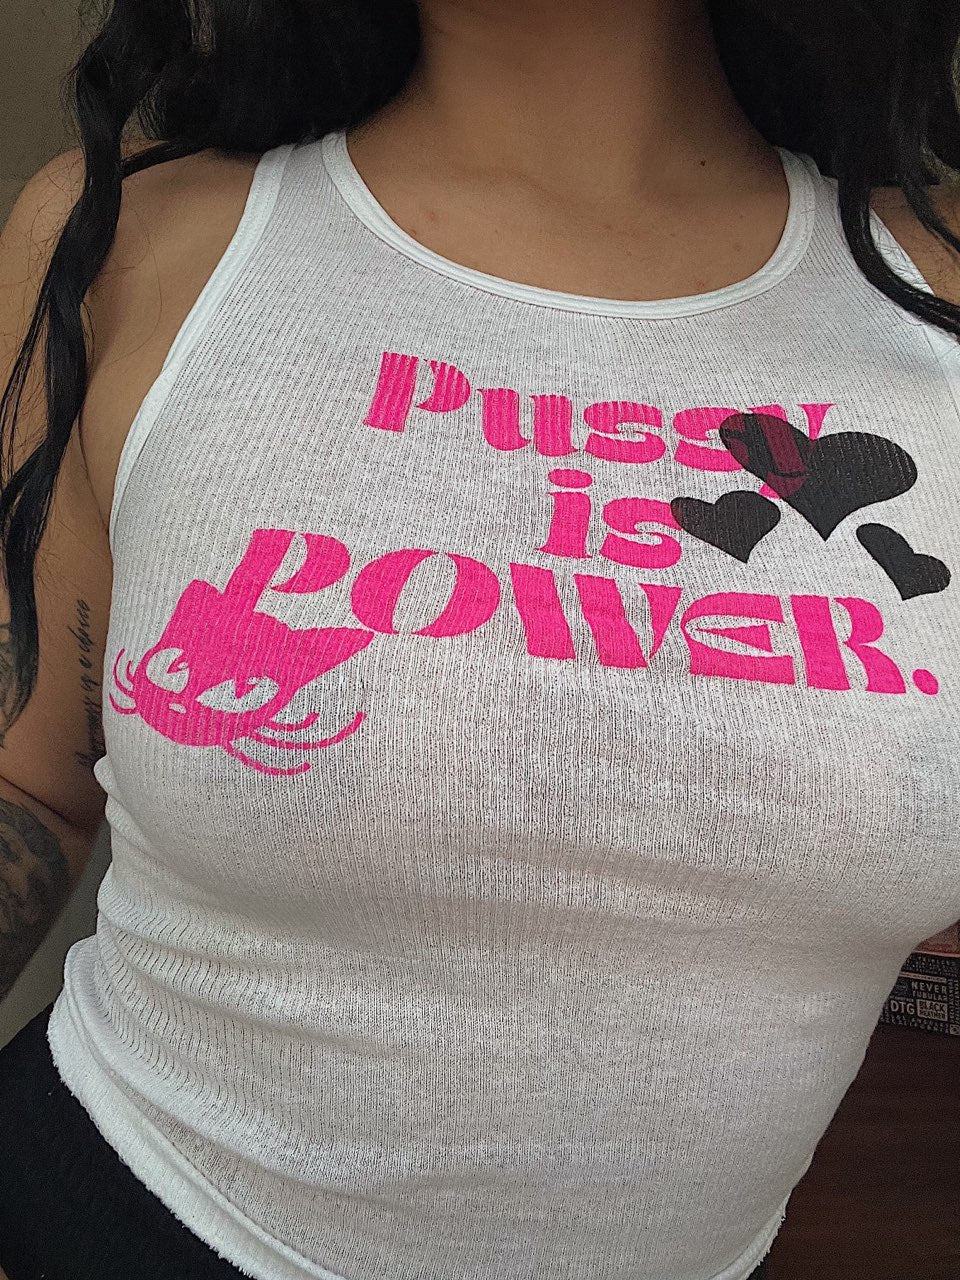 Pussy is Power tank